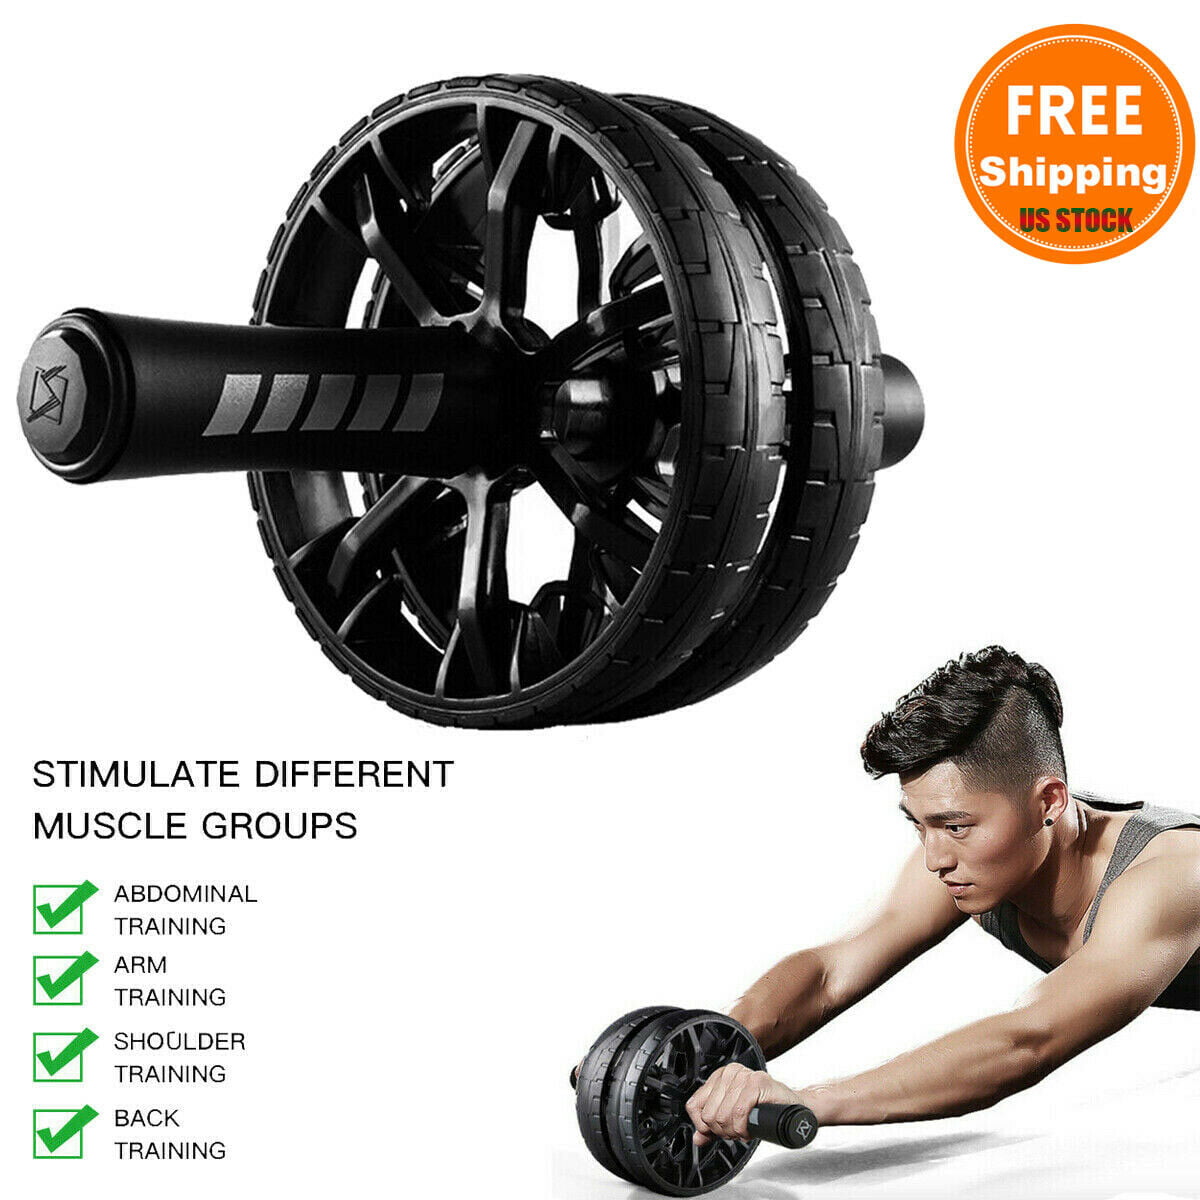 Abdominal Ab Roller Wheel Exercise Fitness Gym Home Core Strength Training Exerc 